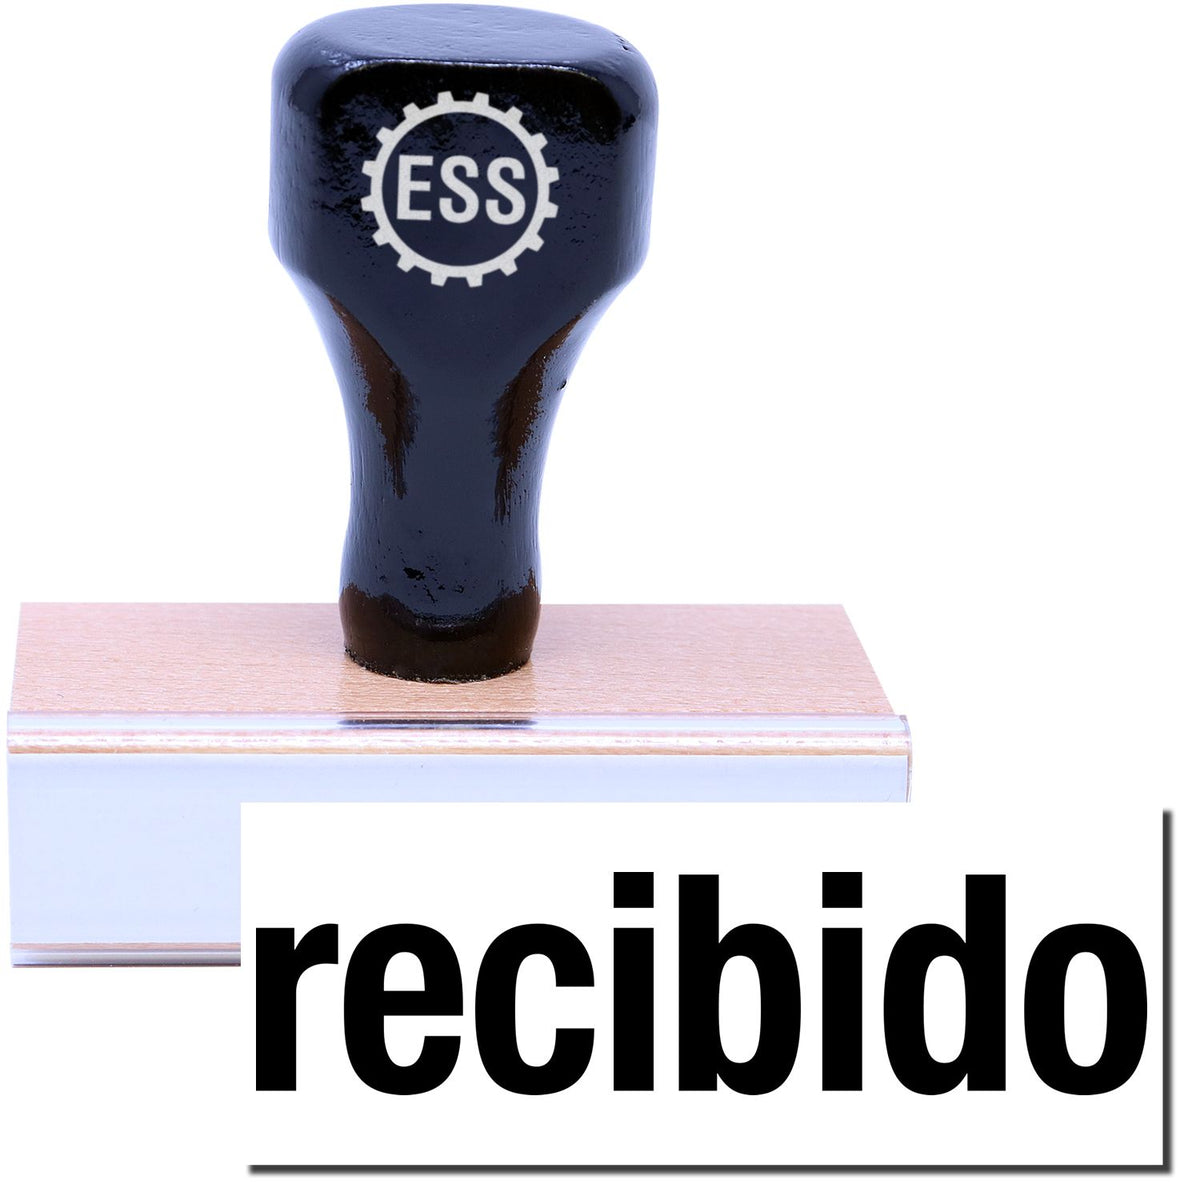 A stock office rubber stamp with a stamped image showing how the text &quot;recibido&quot; in a large bold font is displayed after stamping.